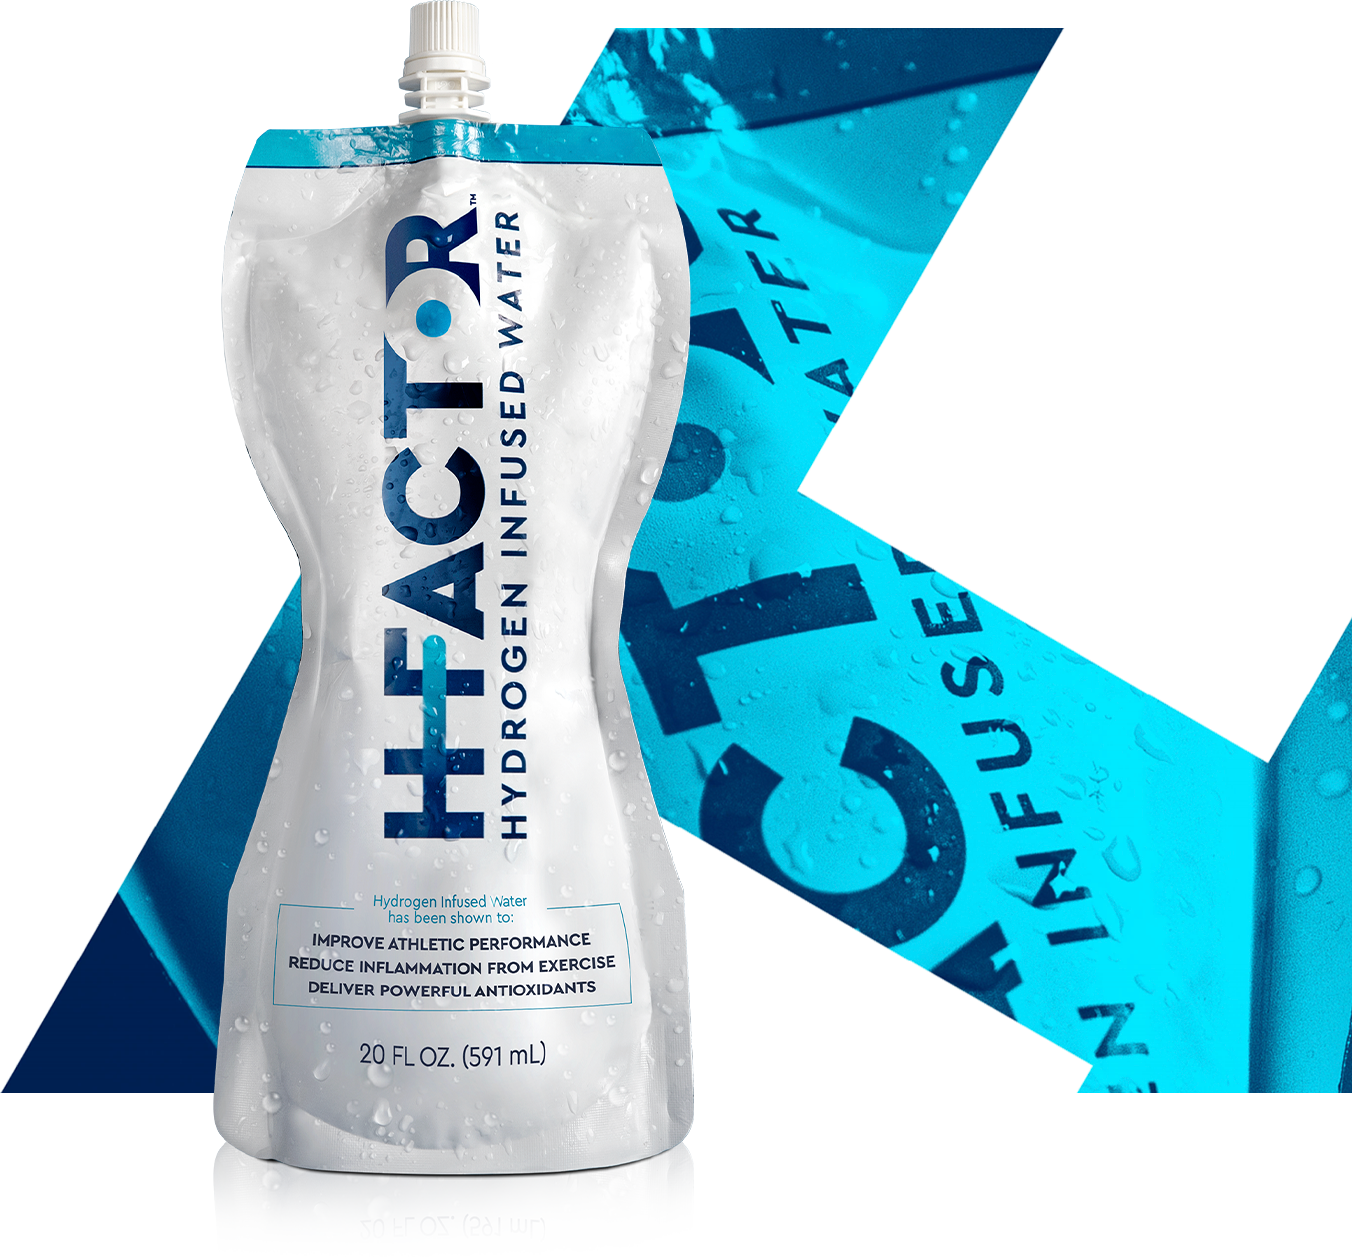 HFactor launches line of hydrogen-rich water pouches - FoodBev Media